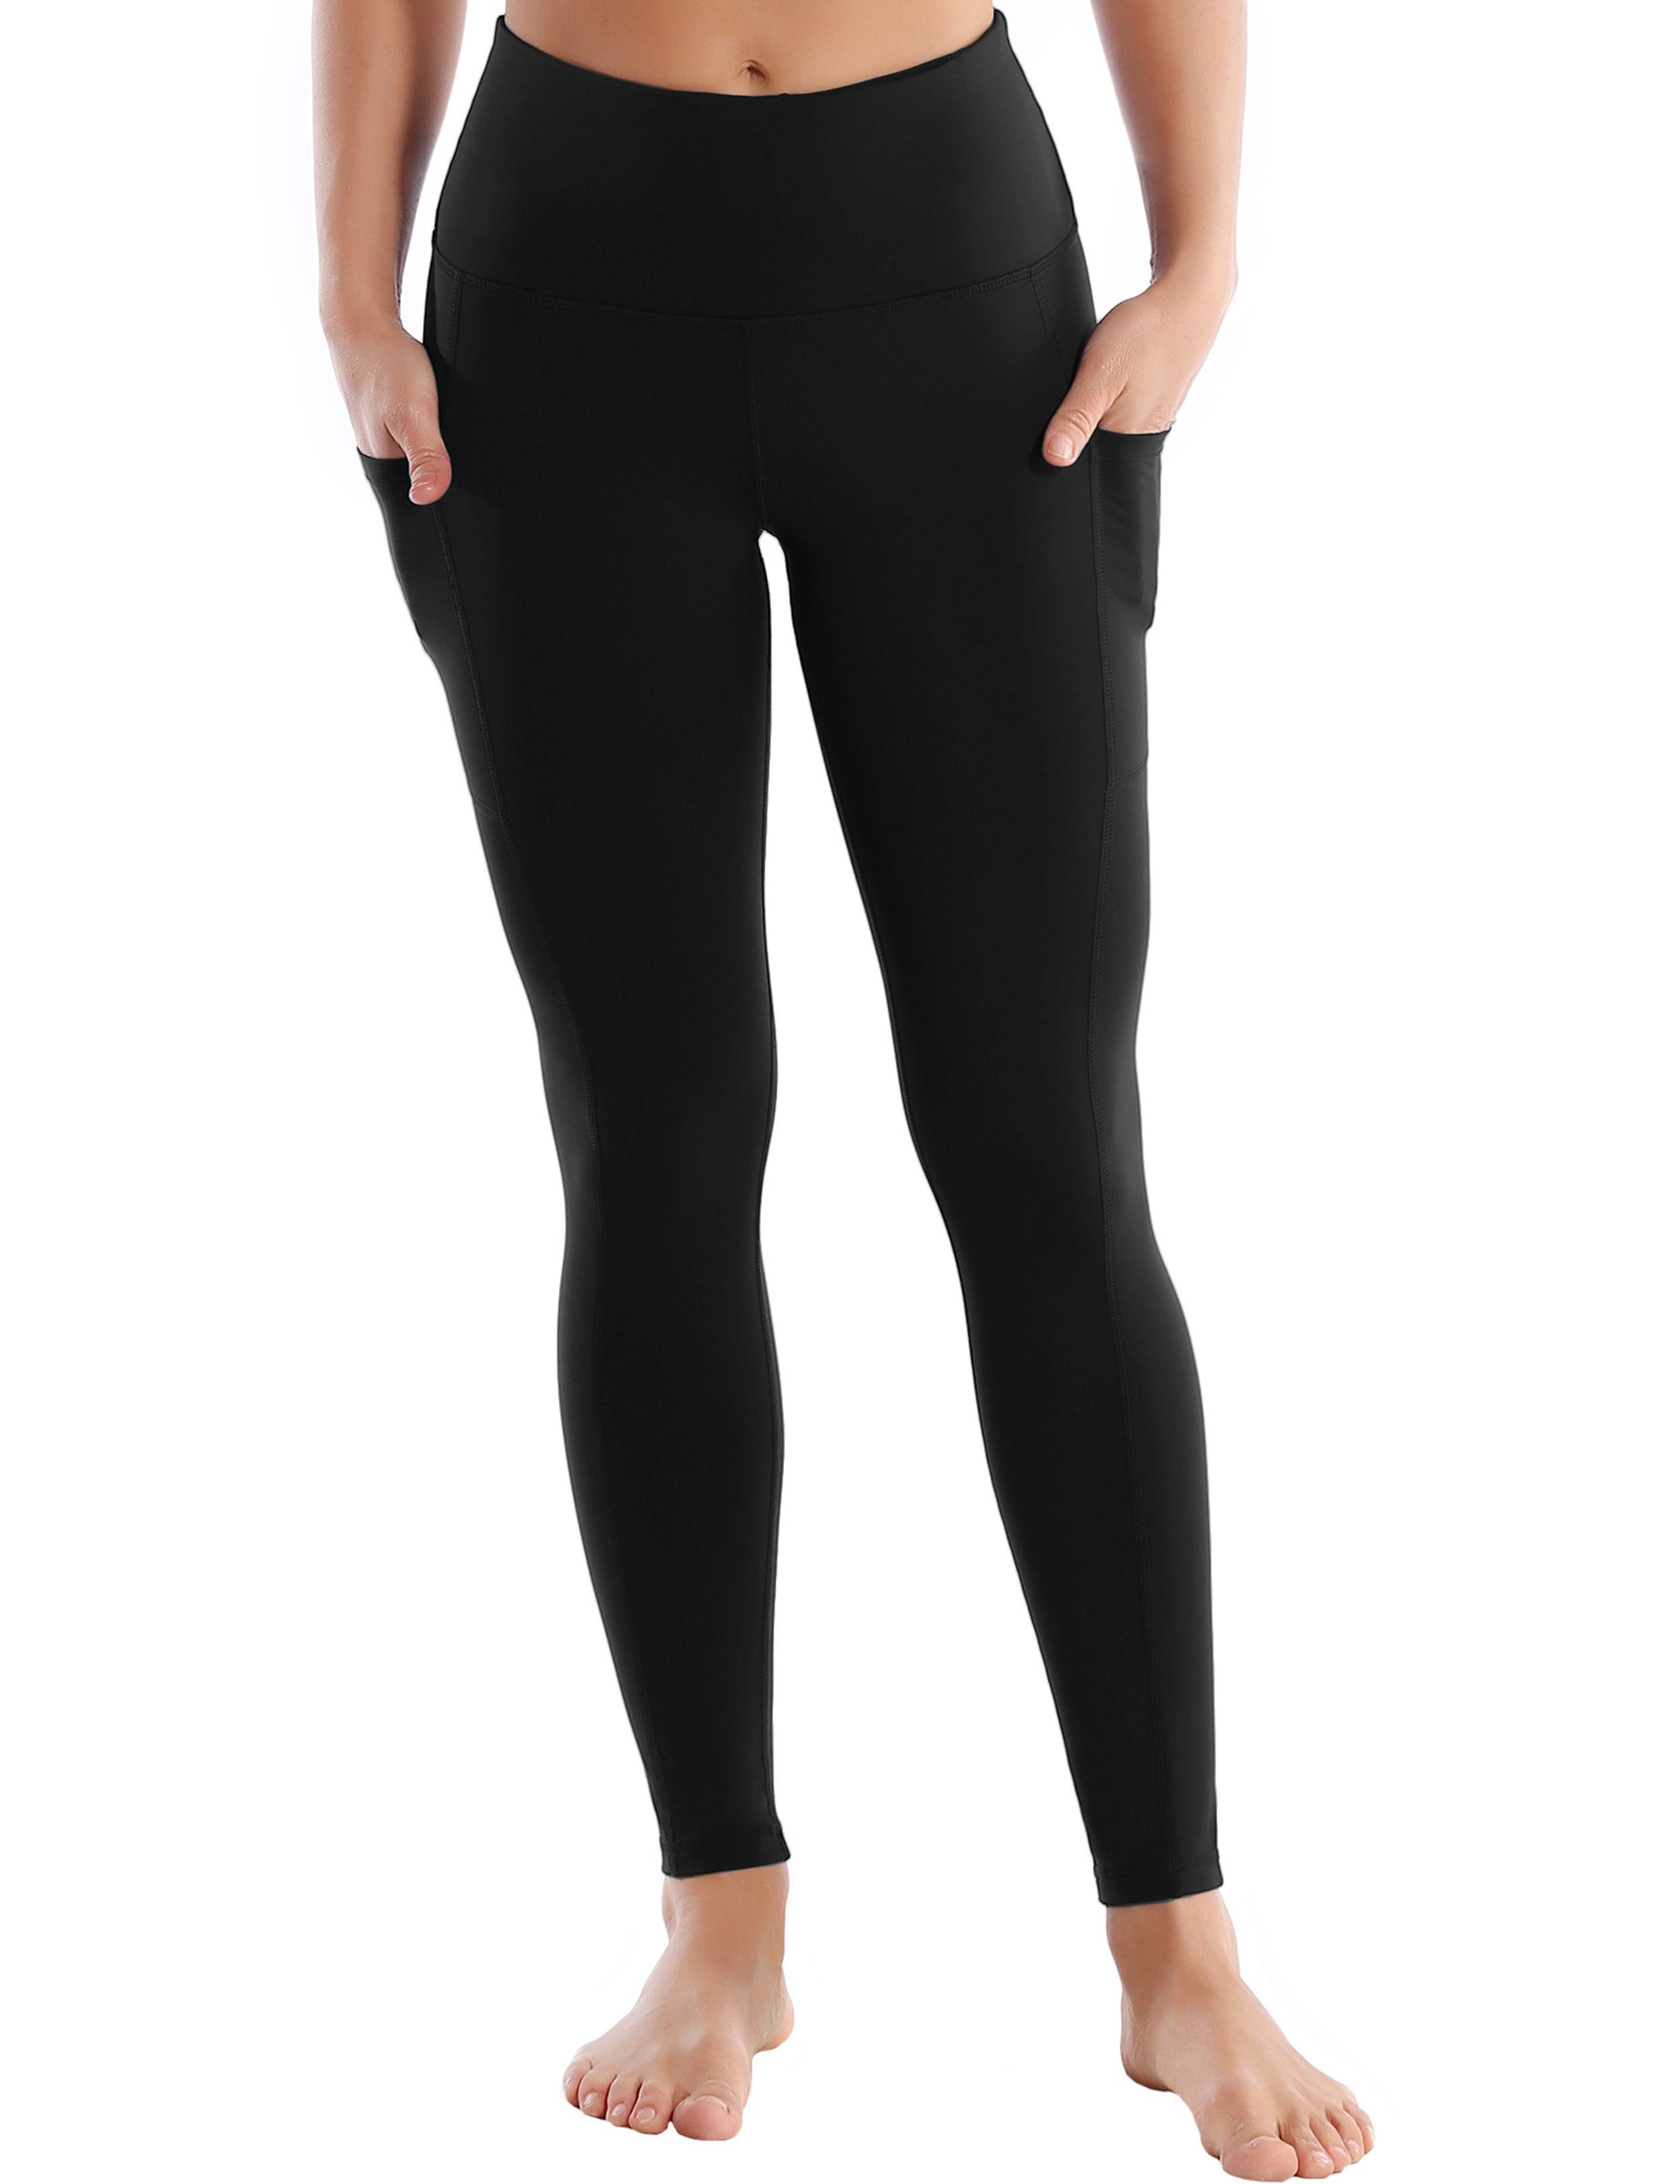 Hip Line Side Pockets Tall Size Pants black Sexy Hip Line Side Pockets 75%Nylon/25%Spandex Fabric doesn't attract lint easily 4-way stretch No see-through Moisture-wicking Tummy control Inner pocket Two lengths